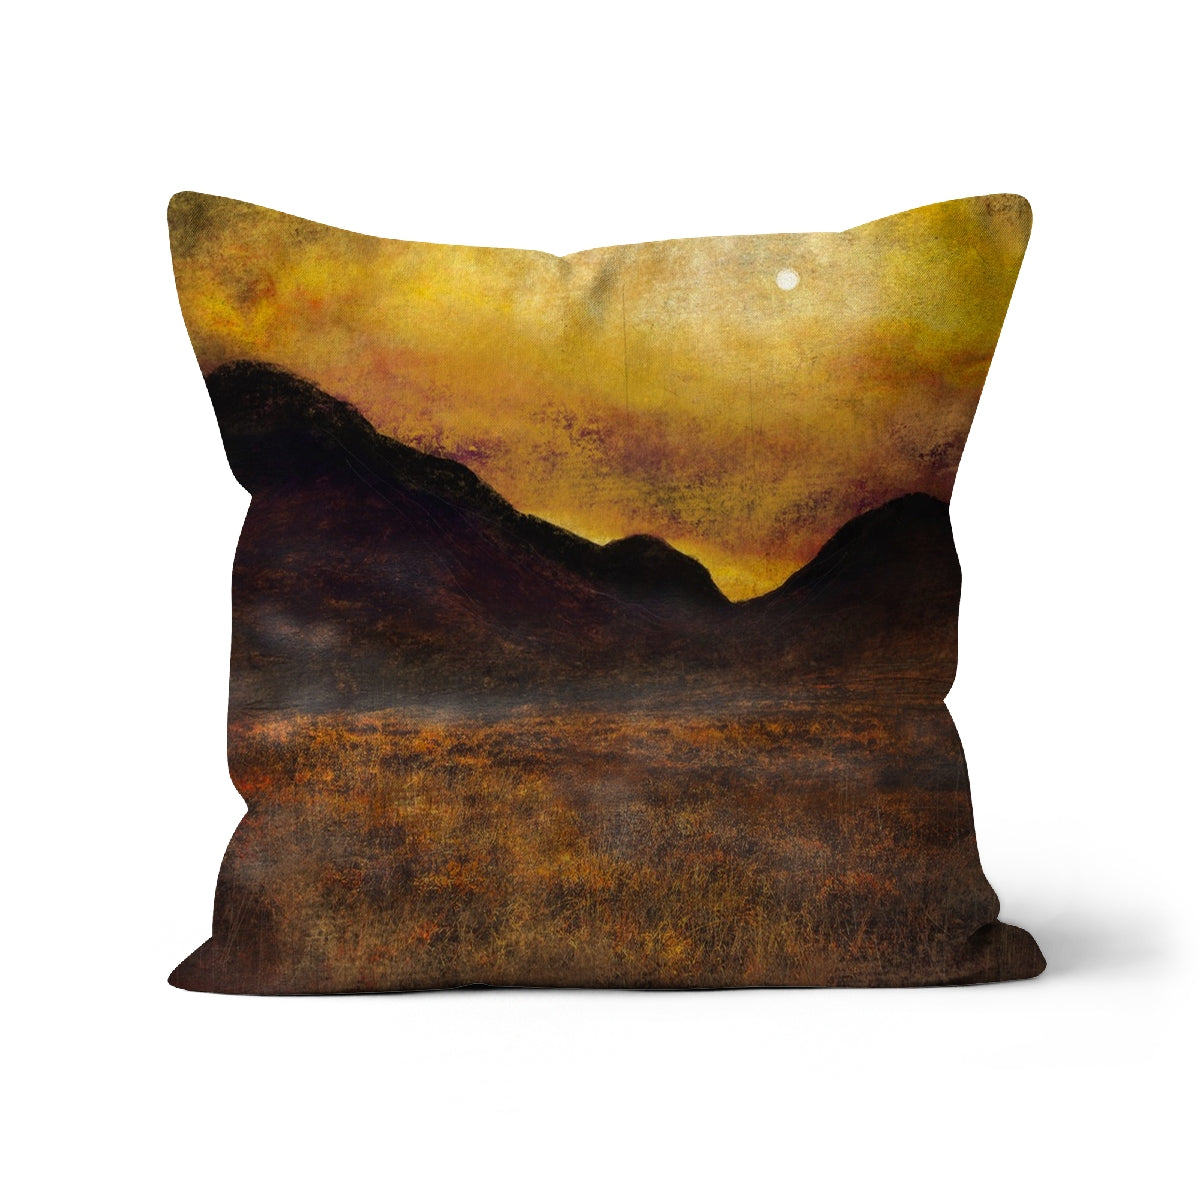 Glencoe Moonlight Art Gifts Cushion-Cushions-Glencoe Art Gallery-Faux Suede-22"x22"-Paintings, Prints, Homeware, Art Gifts From Scotland By Scottish Artist Kevin Hunter